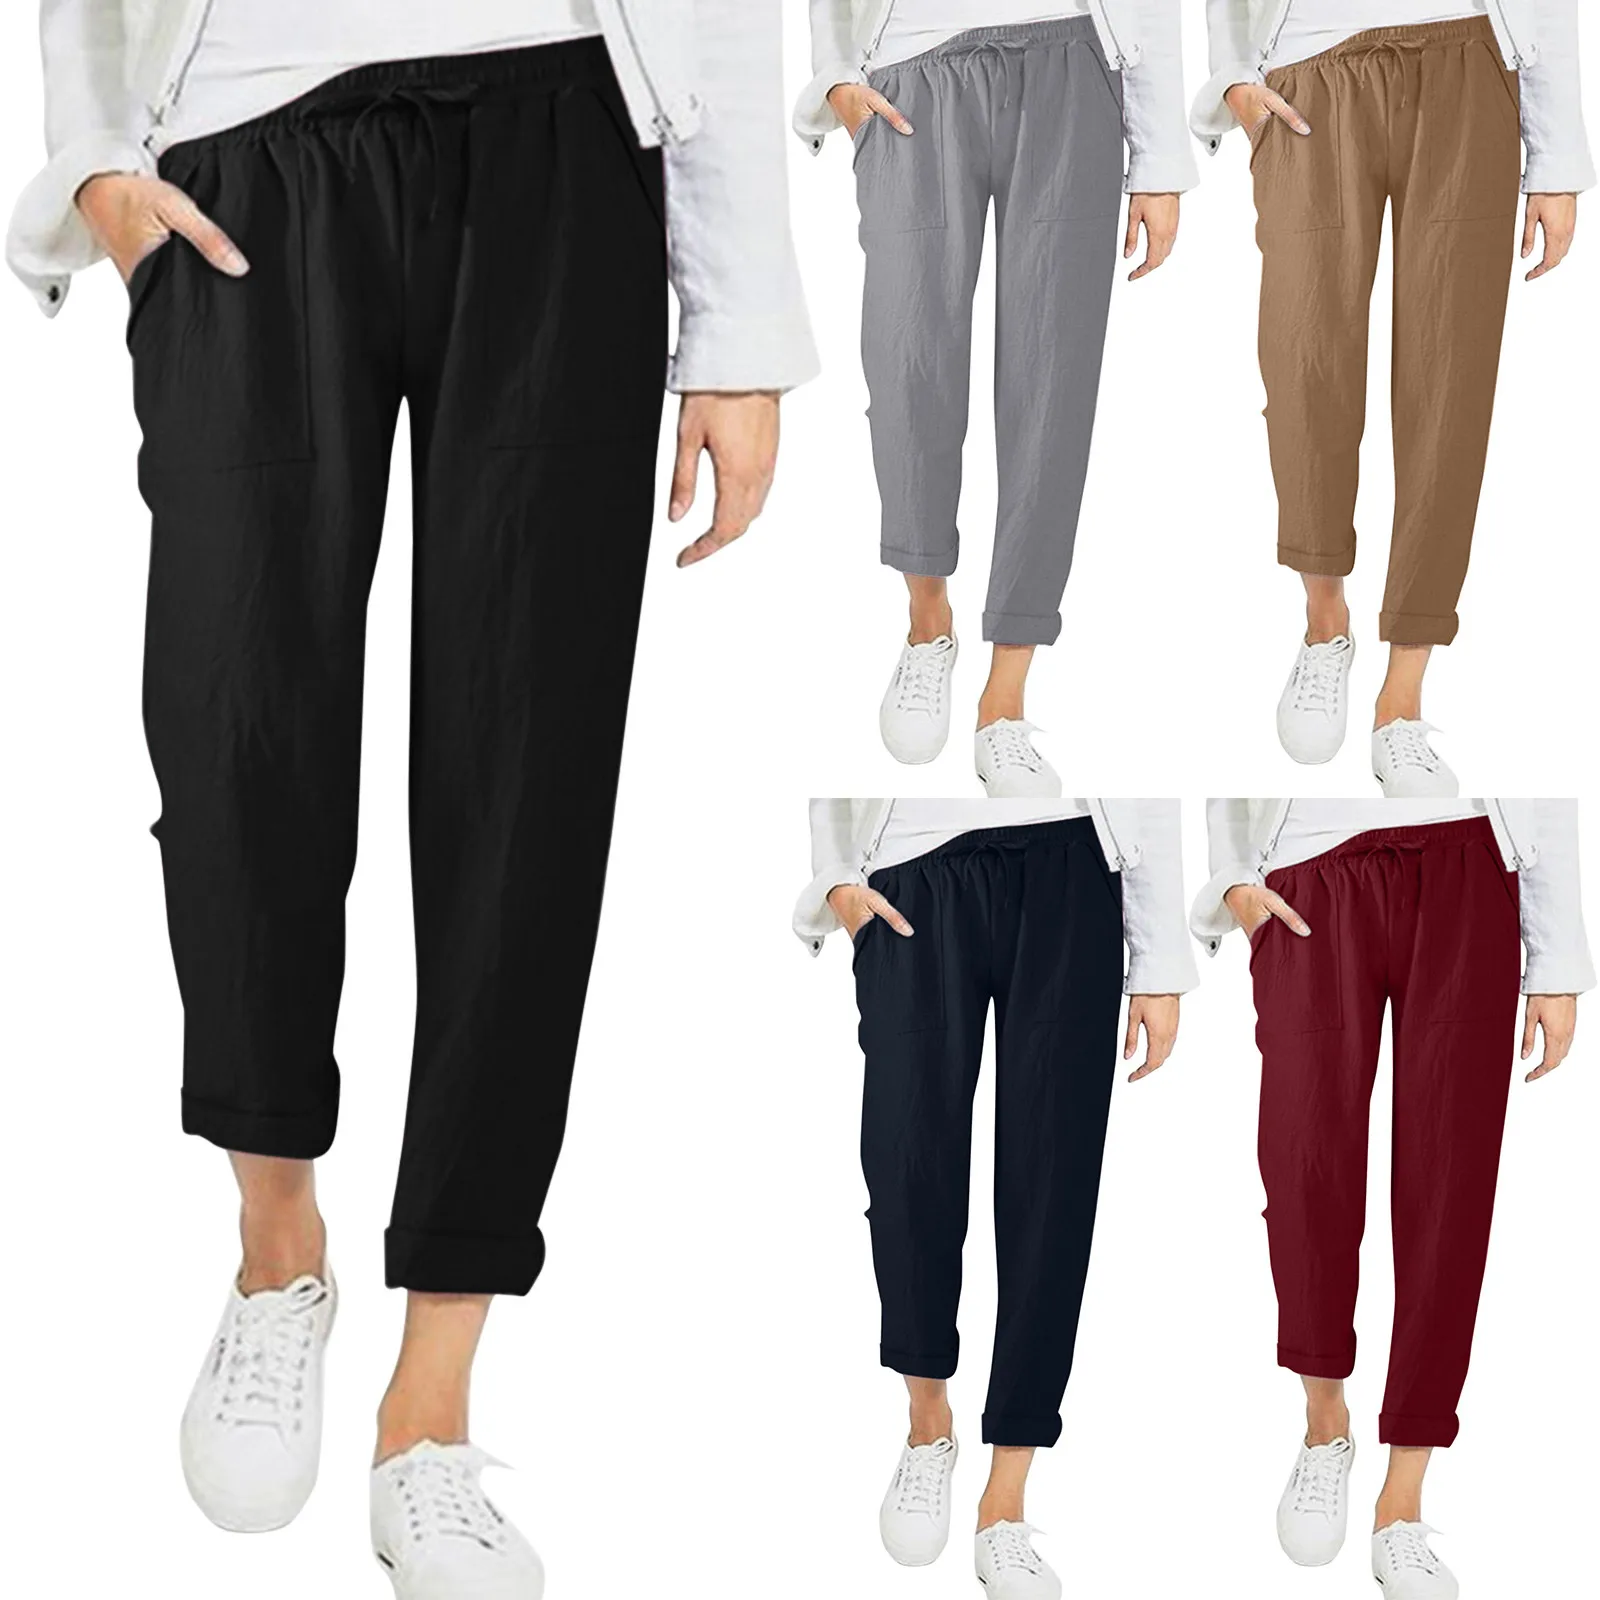 Cotton Linen Pants Women Casual Spring Summer High Waist Elastic Ankle-Length Pants Female Solid Pockets Harem Trousers 2024 fashion butterfly printed radish denim trousers women spring versatile high waisted jeans elegant slim ankle tied harem pants